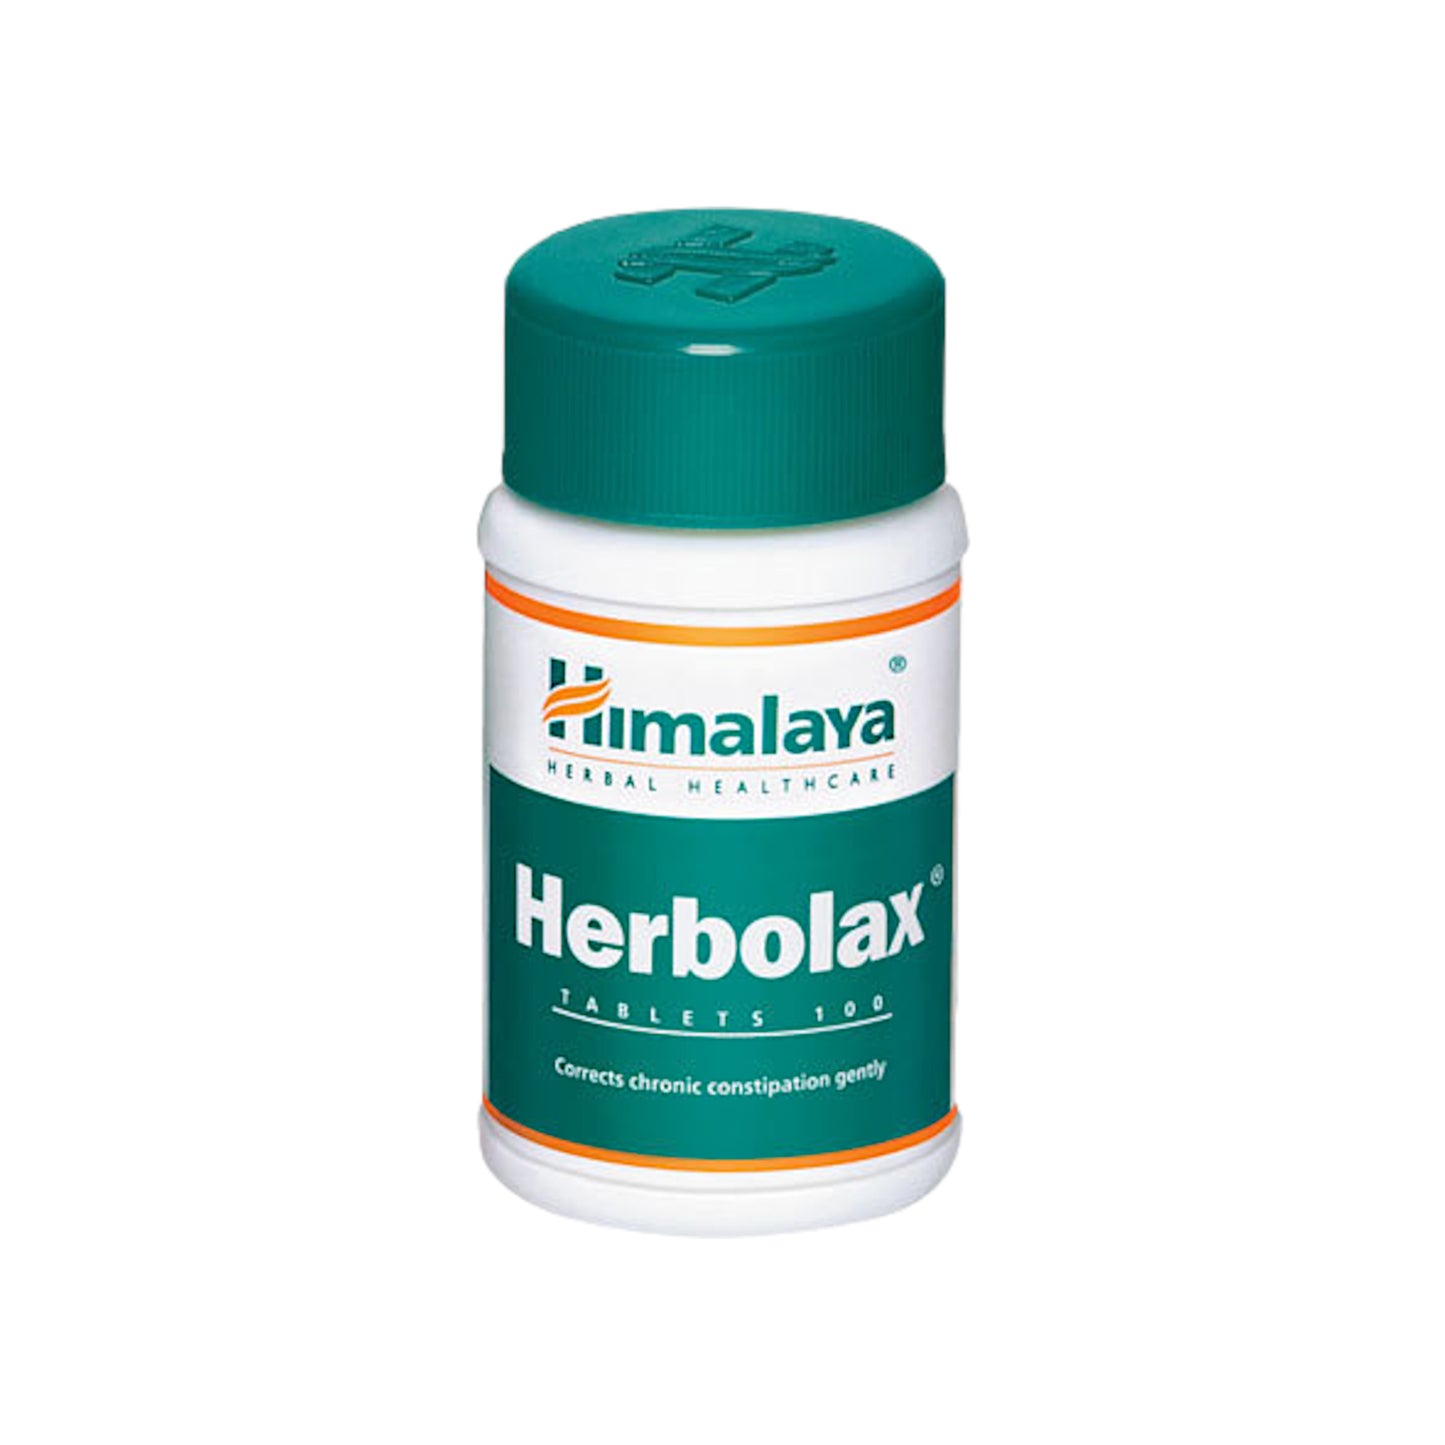 Image: Himalaya Herbolax 100 Tablets:  Remedy for chronic constipation, safe, non-habit forming, and pregnancy-friendly.